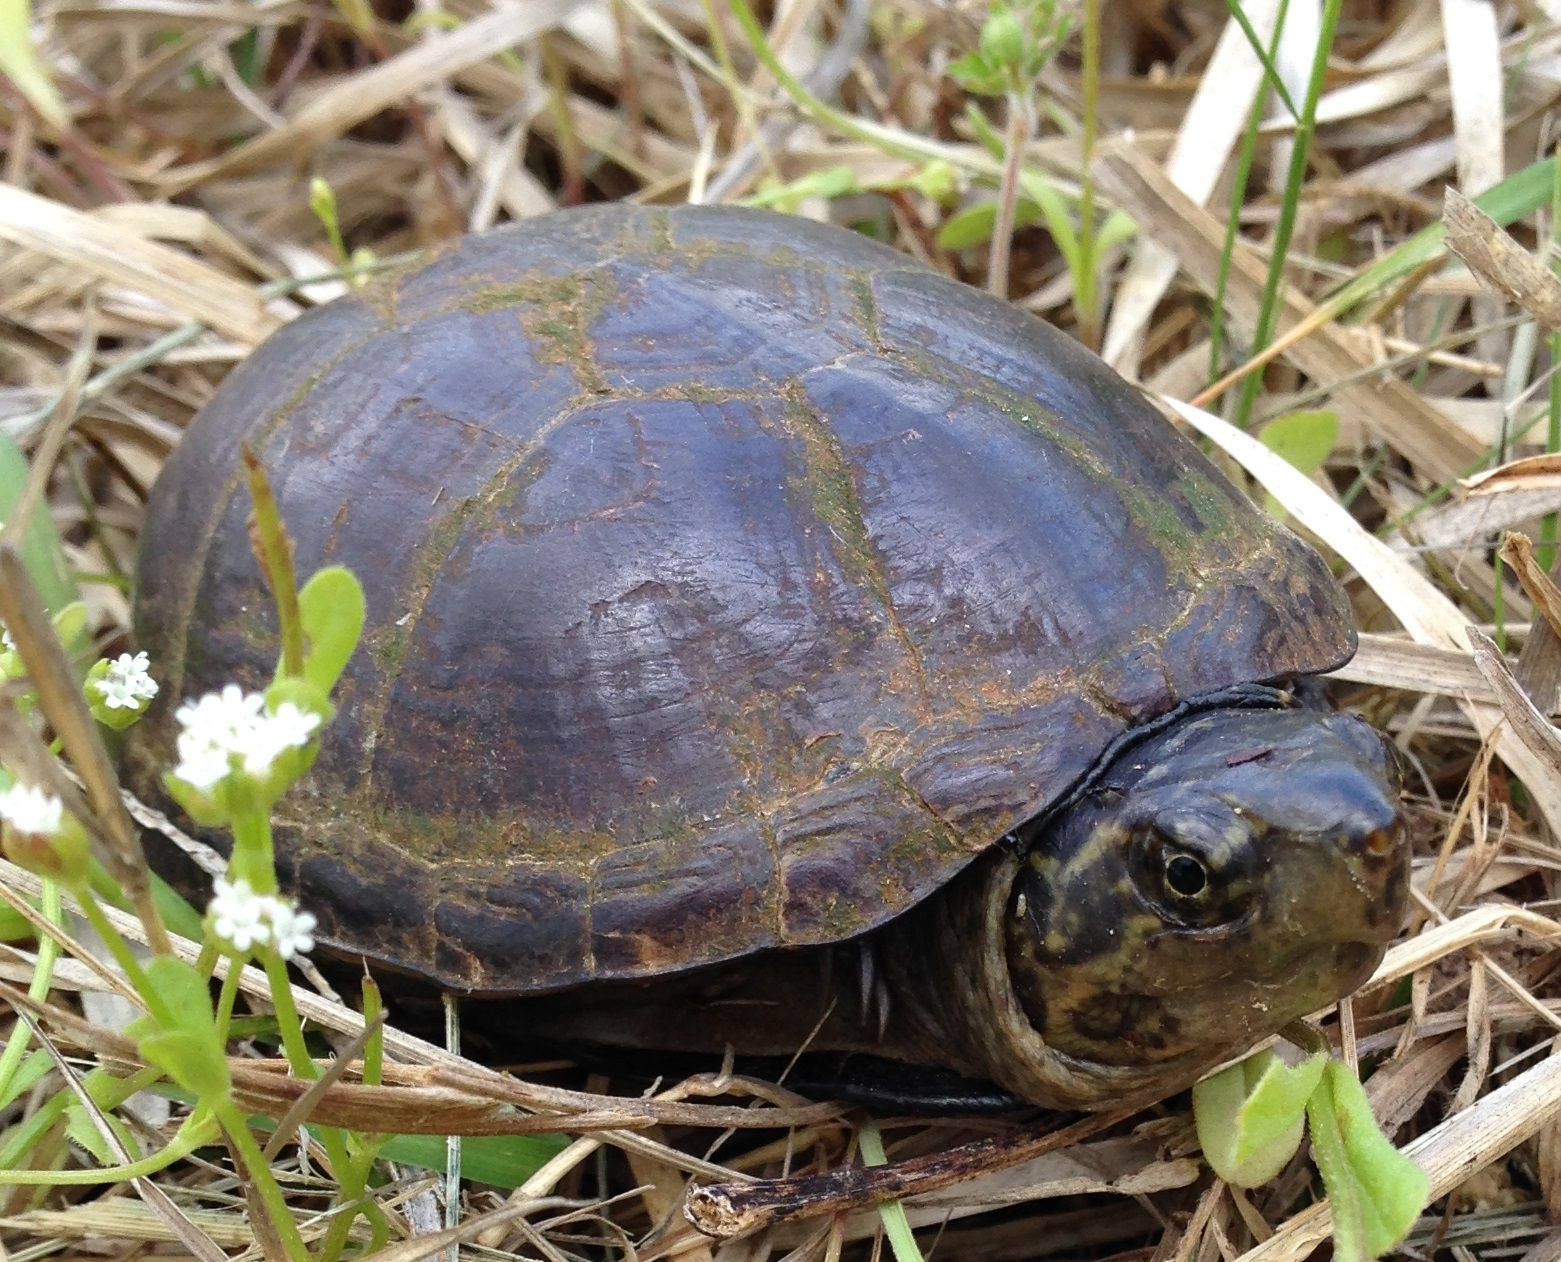 Mud Turtle With A Mossy Carapace Wallpaper